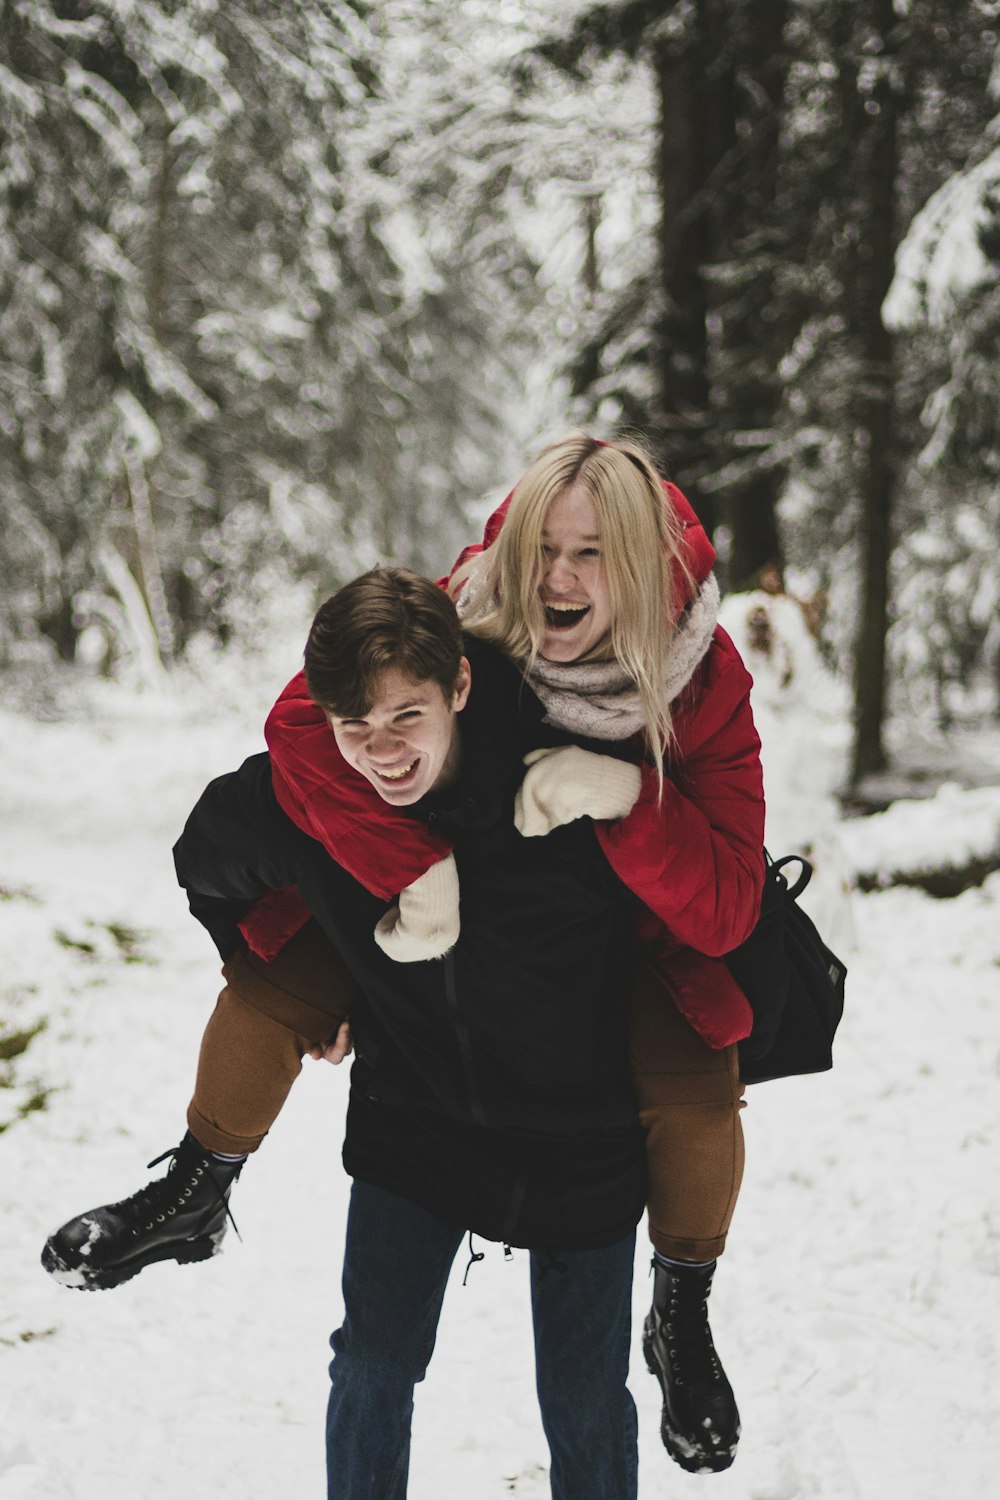 woman in black jacket carrying girl in red jacket on snow covered ground during daytime